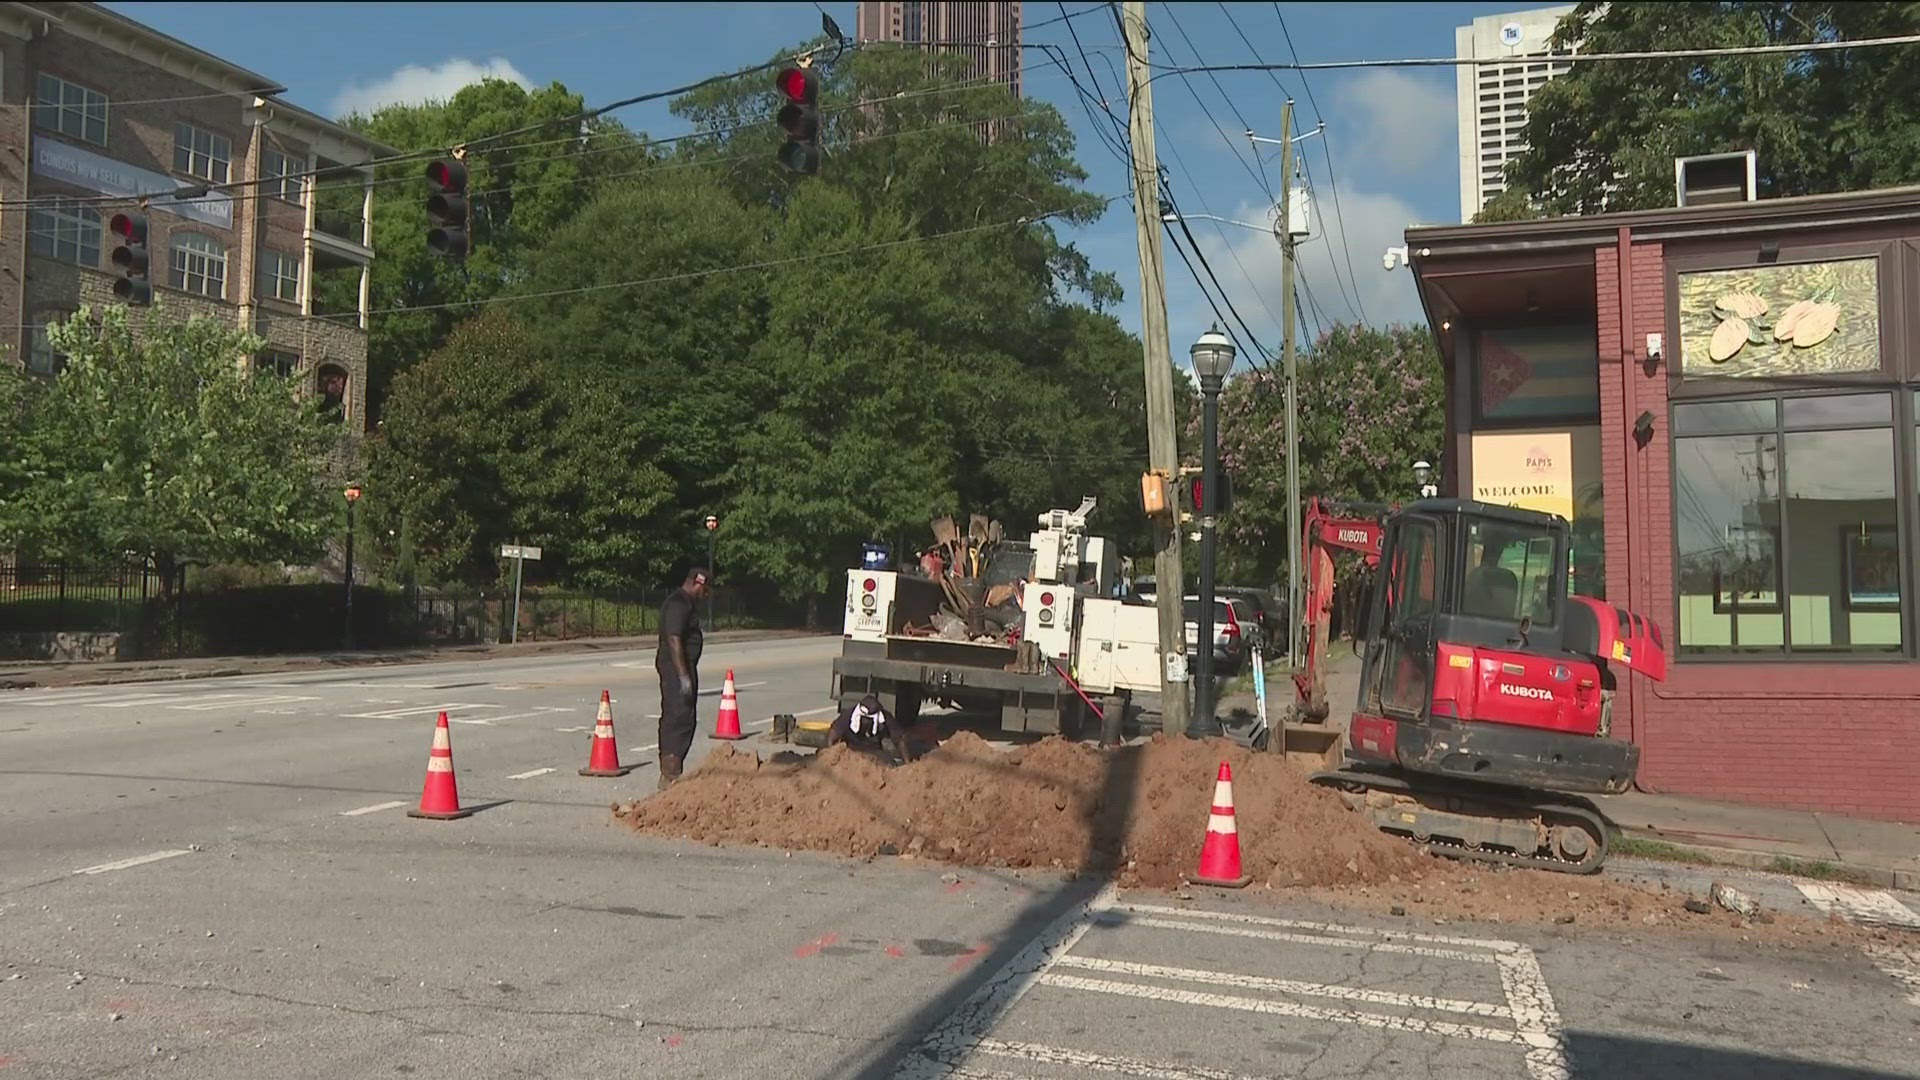 The watershed department said a reported water main break near Mary Mac's Tea Room in Atlanta on Saturday morning has been fixed.